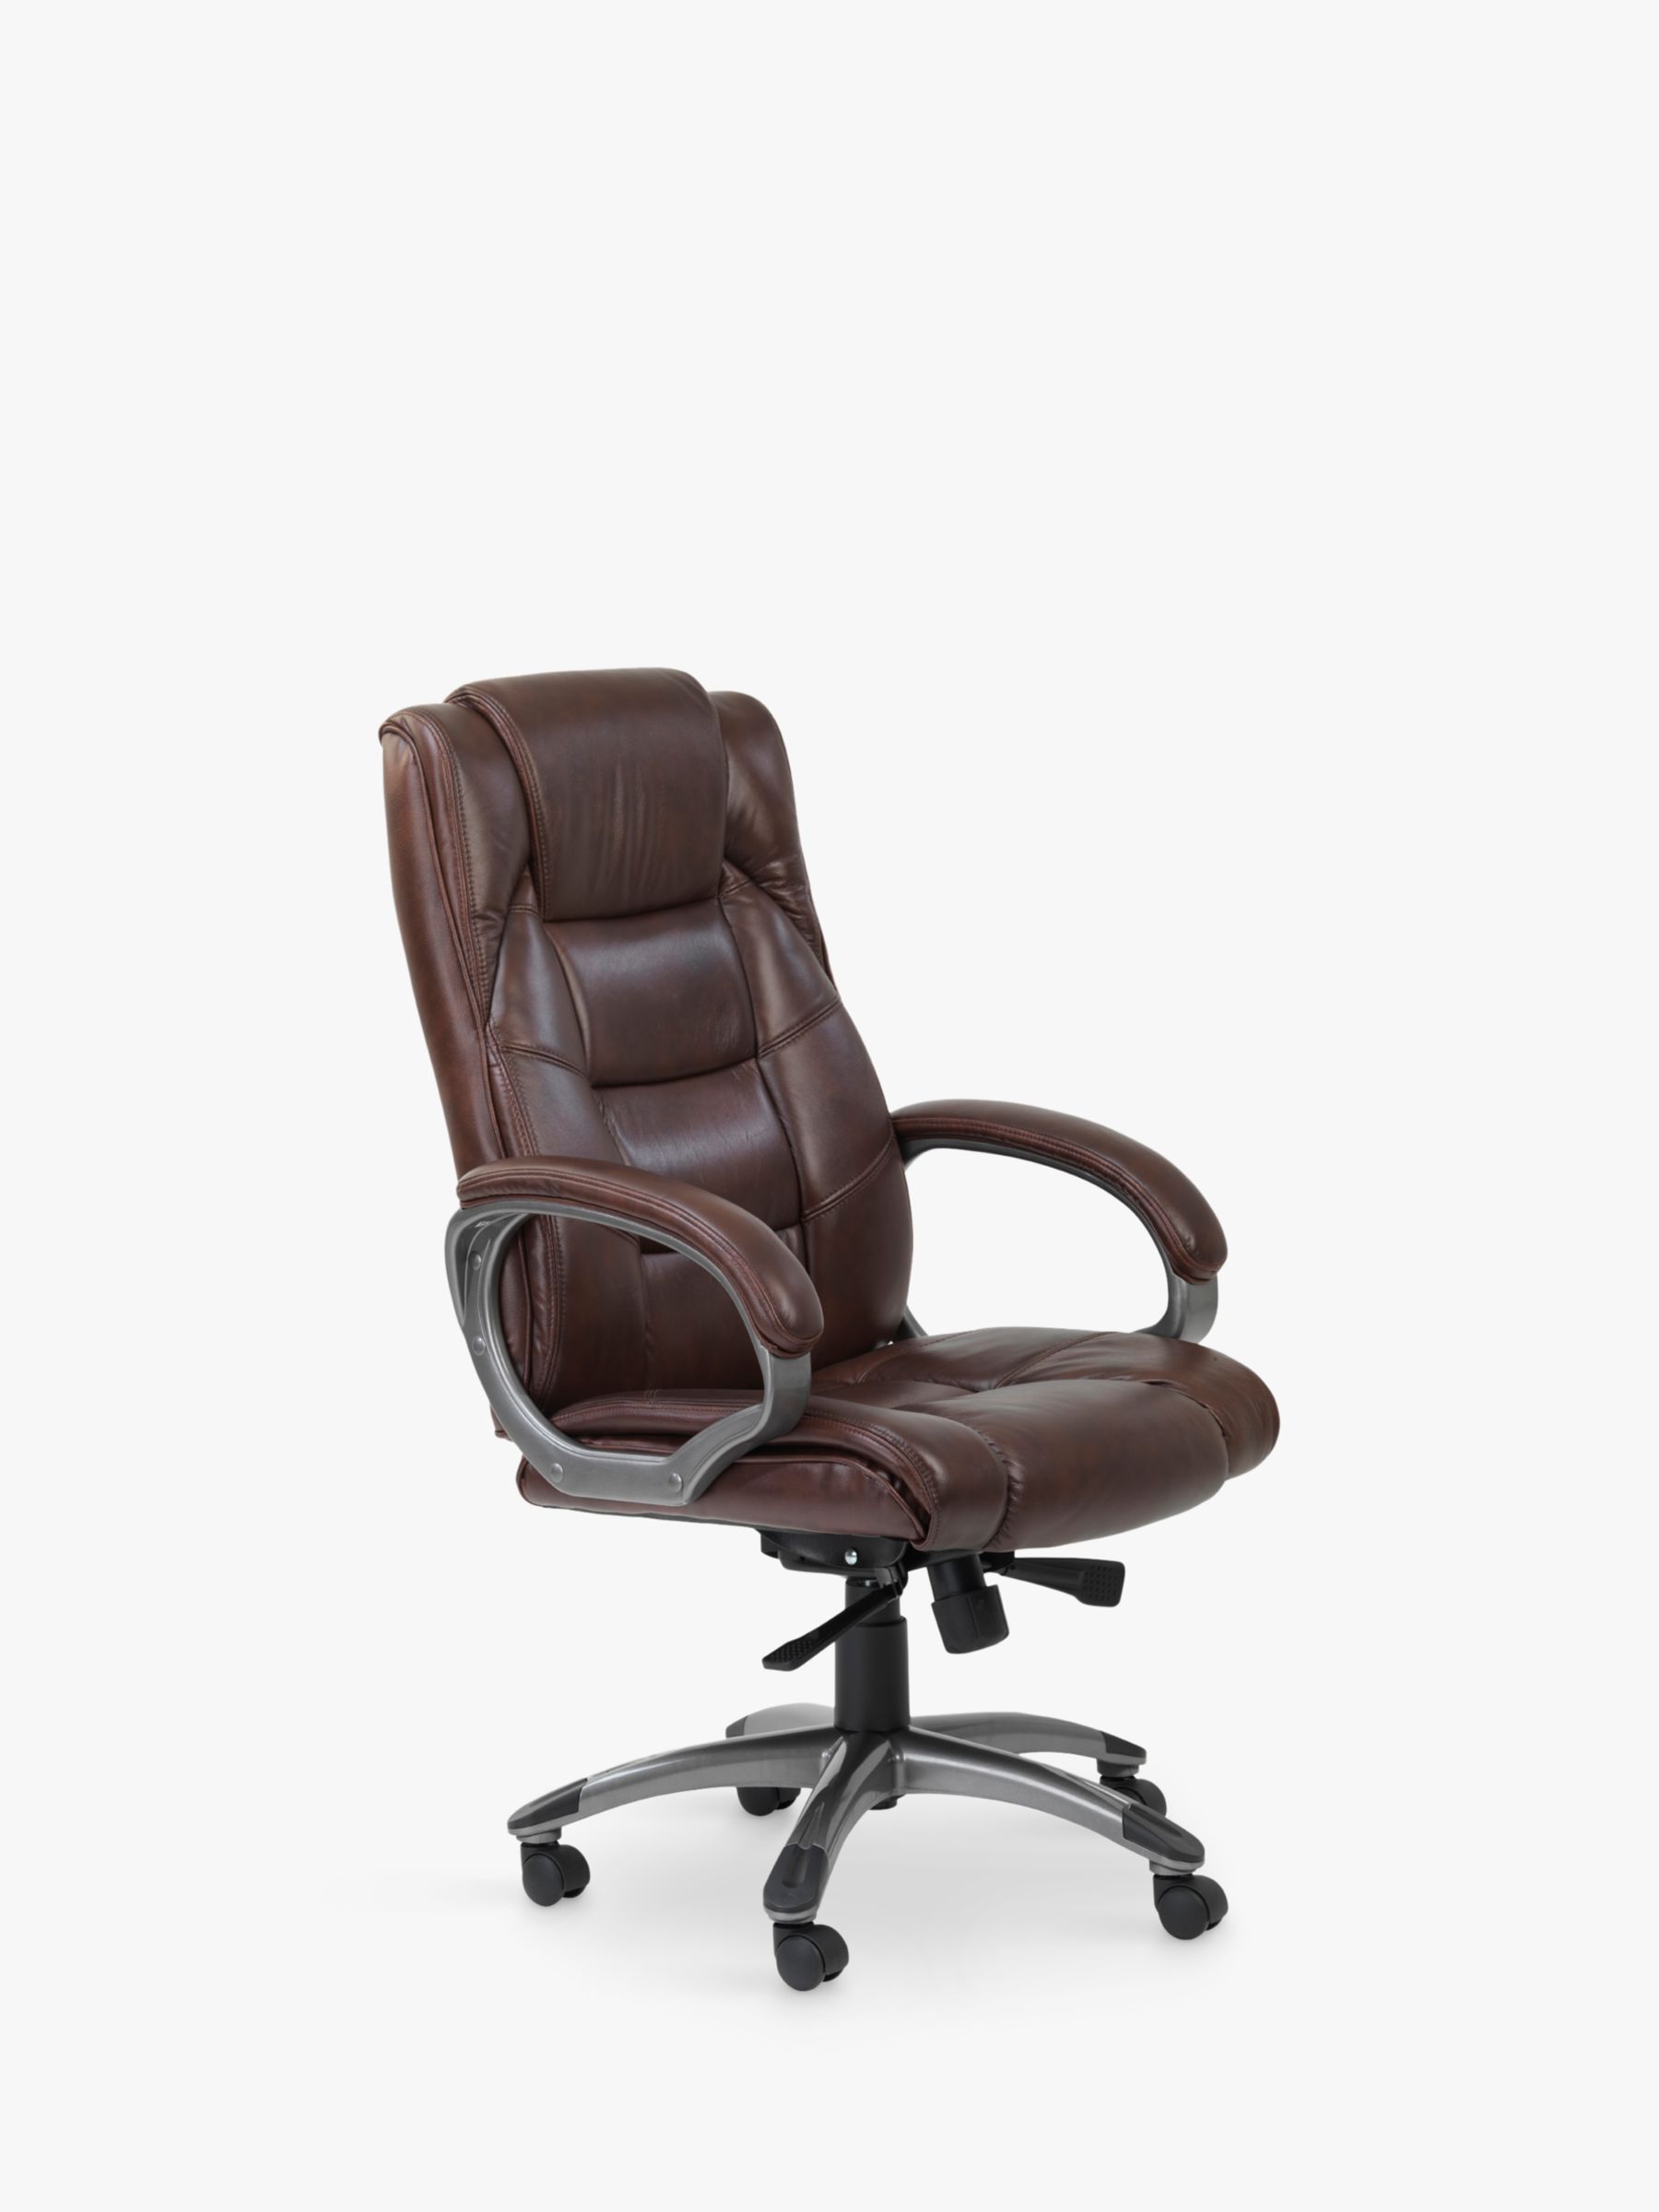 Alphason Northland Leather Office Chair, Office Chair Brown Leather